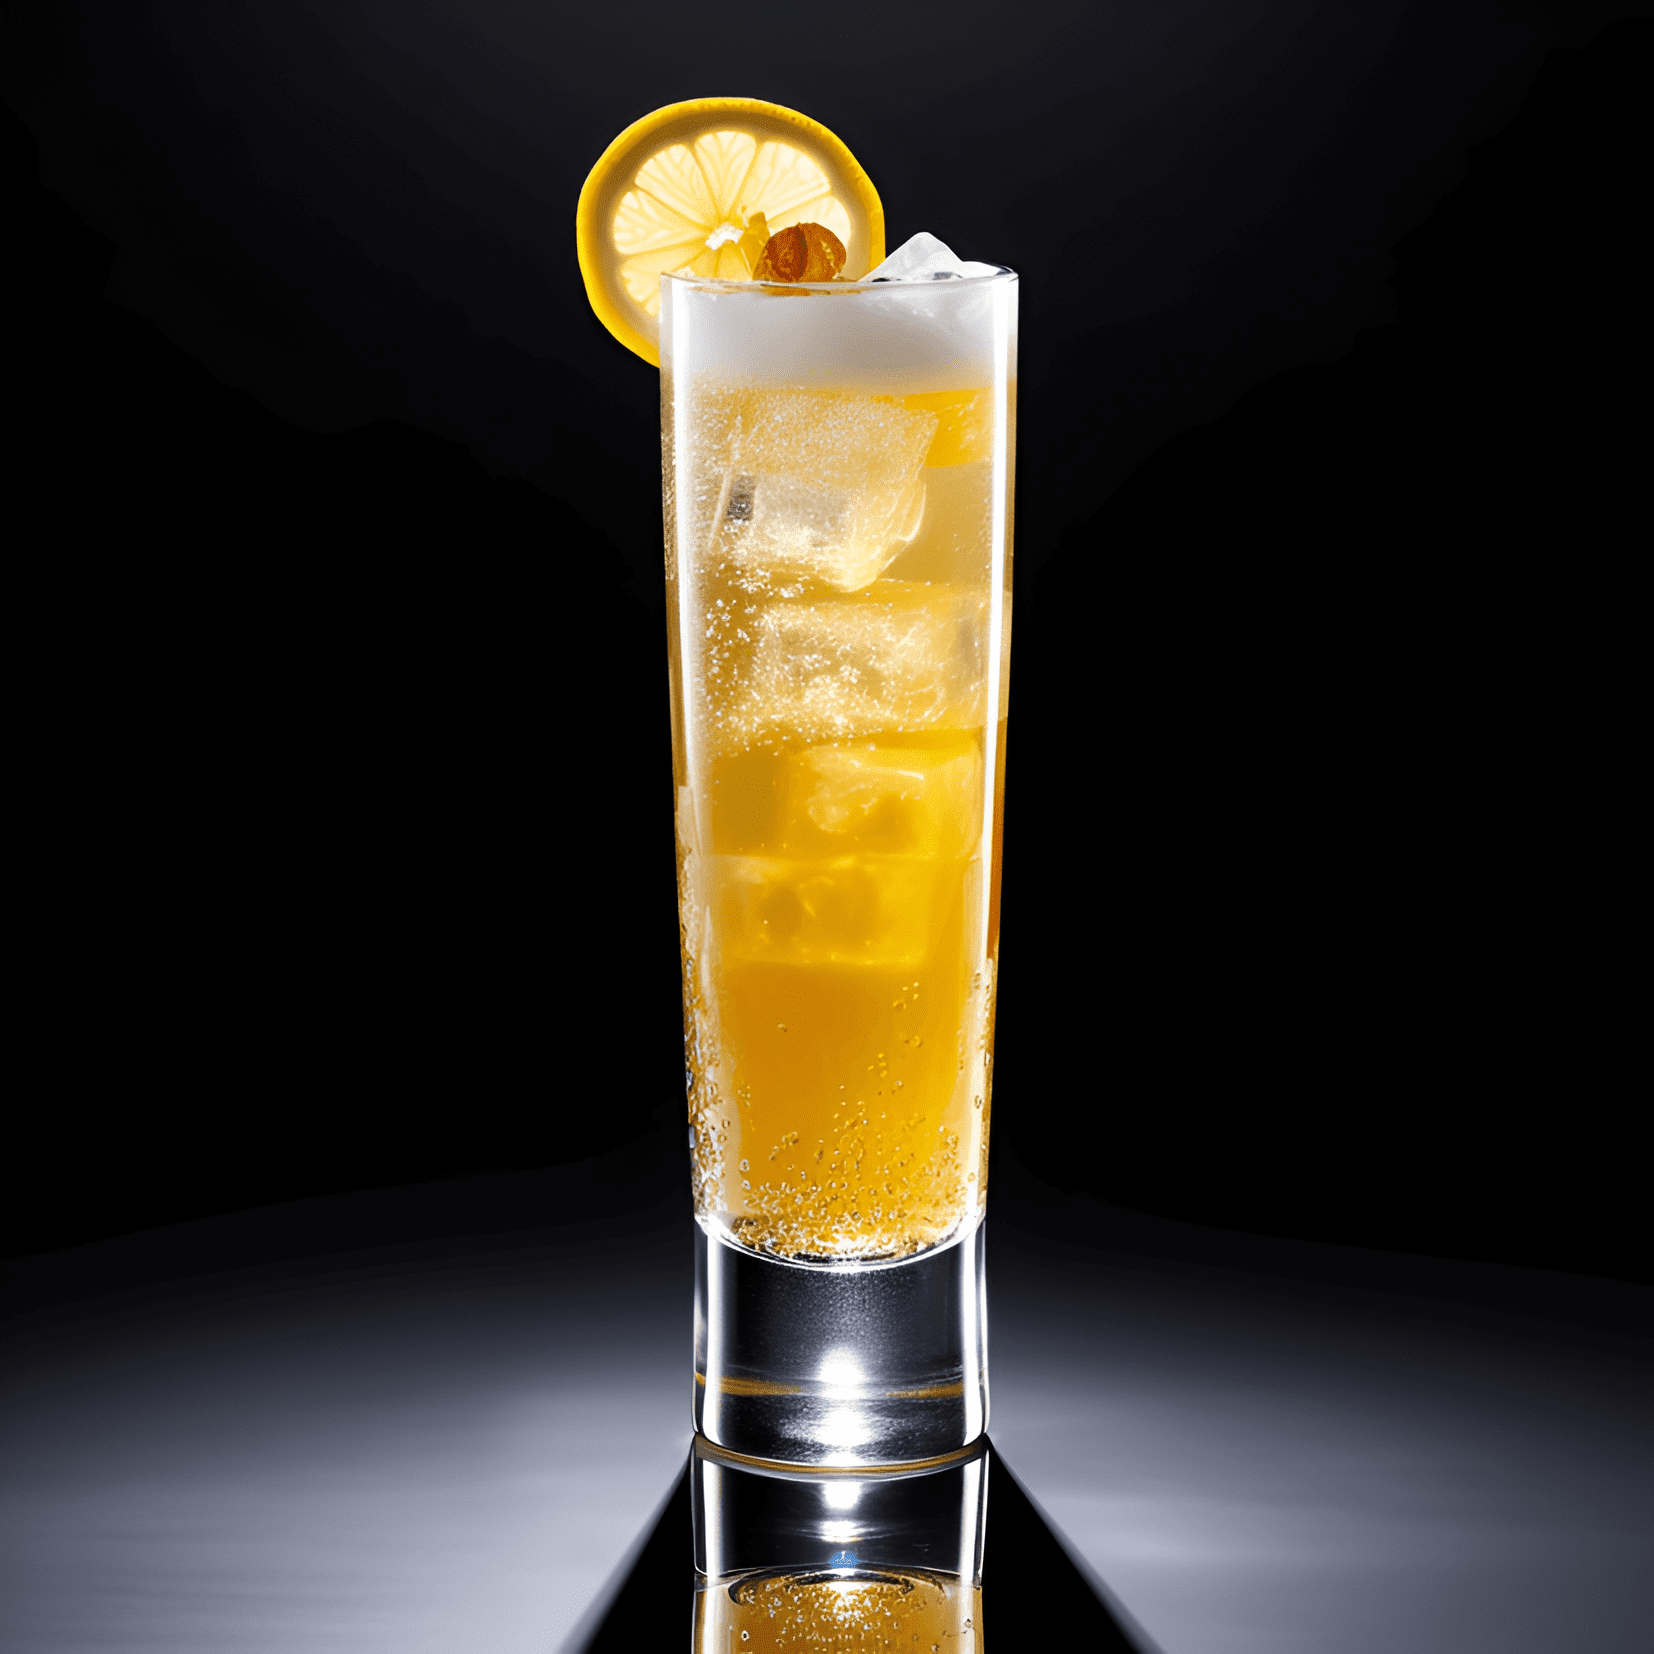 Golden Fizz Cocktail Recipe - The Golden Fizz is a well-balanced cocktail with a rich, creamy texture. It has a slightly sweet and sour taste, with a hint of citrus from the lemon juice. The gin provides a strong, botanical backbone, while the egg yolk adds a smooth, velvety mouthfeel.